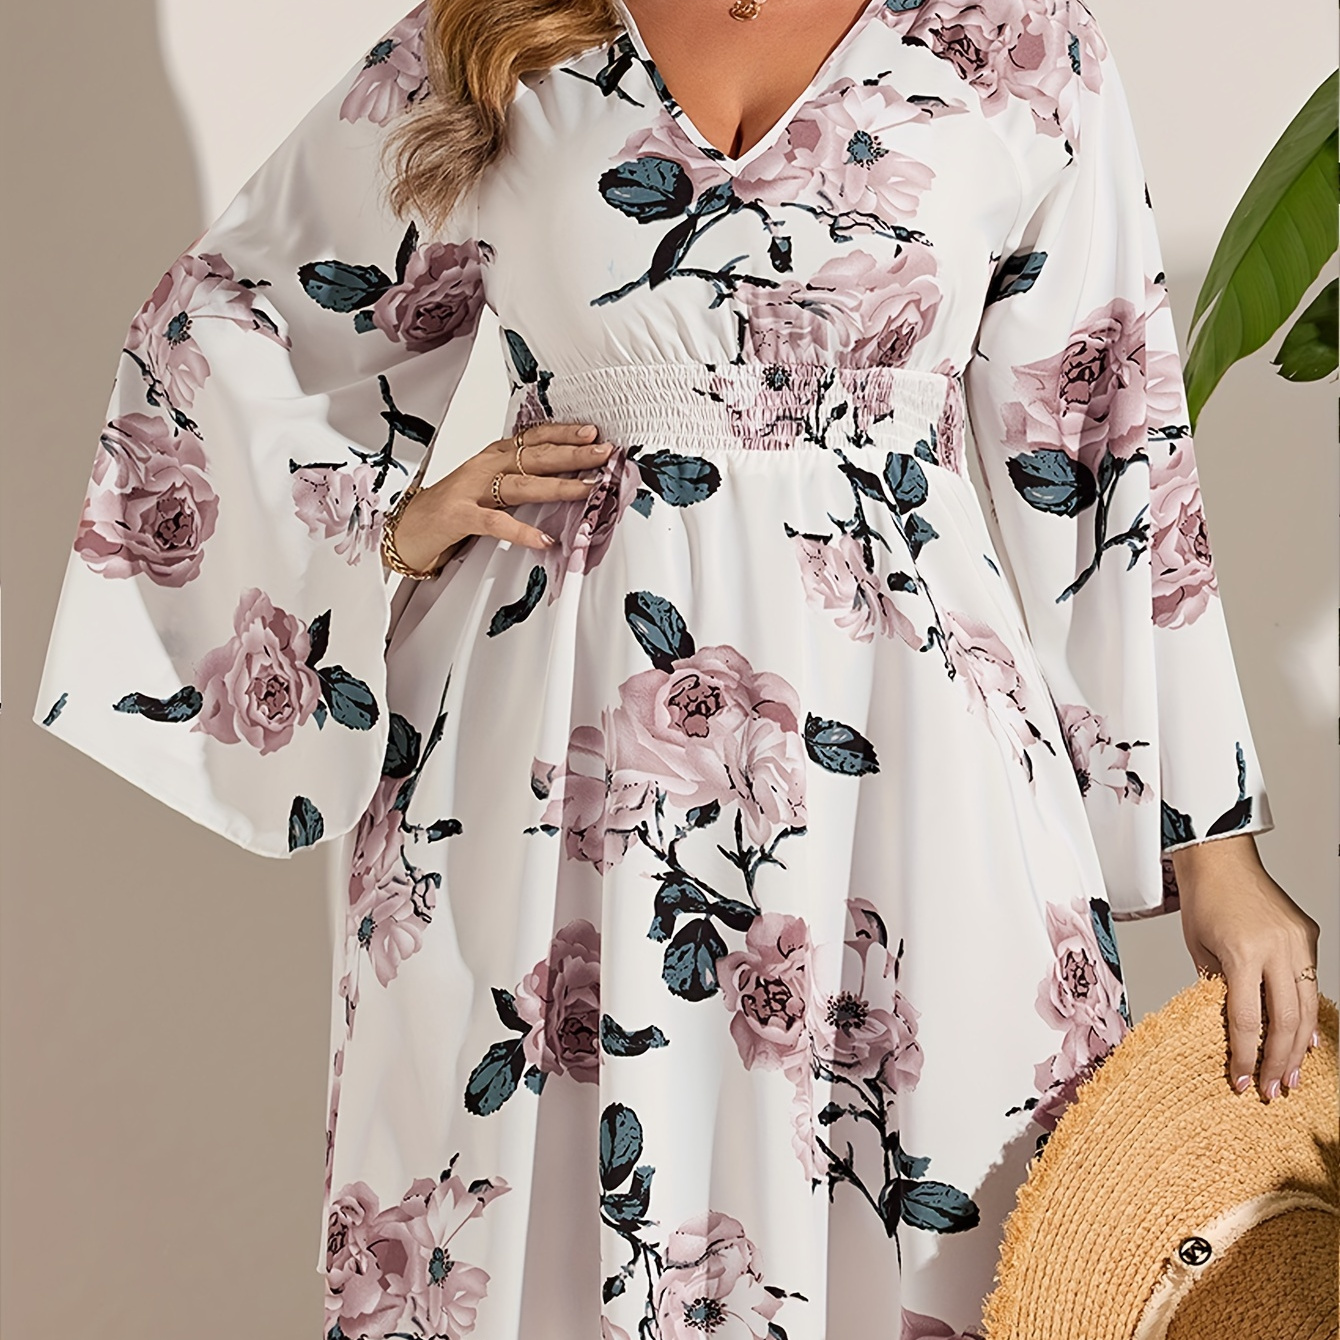 

Plus Size Floral Print Cinched Waist Dress, Vacation V Neck Long Sleeve Dress For Spring & Fall, Women's Plus Size Clothing